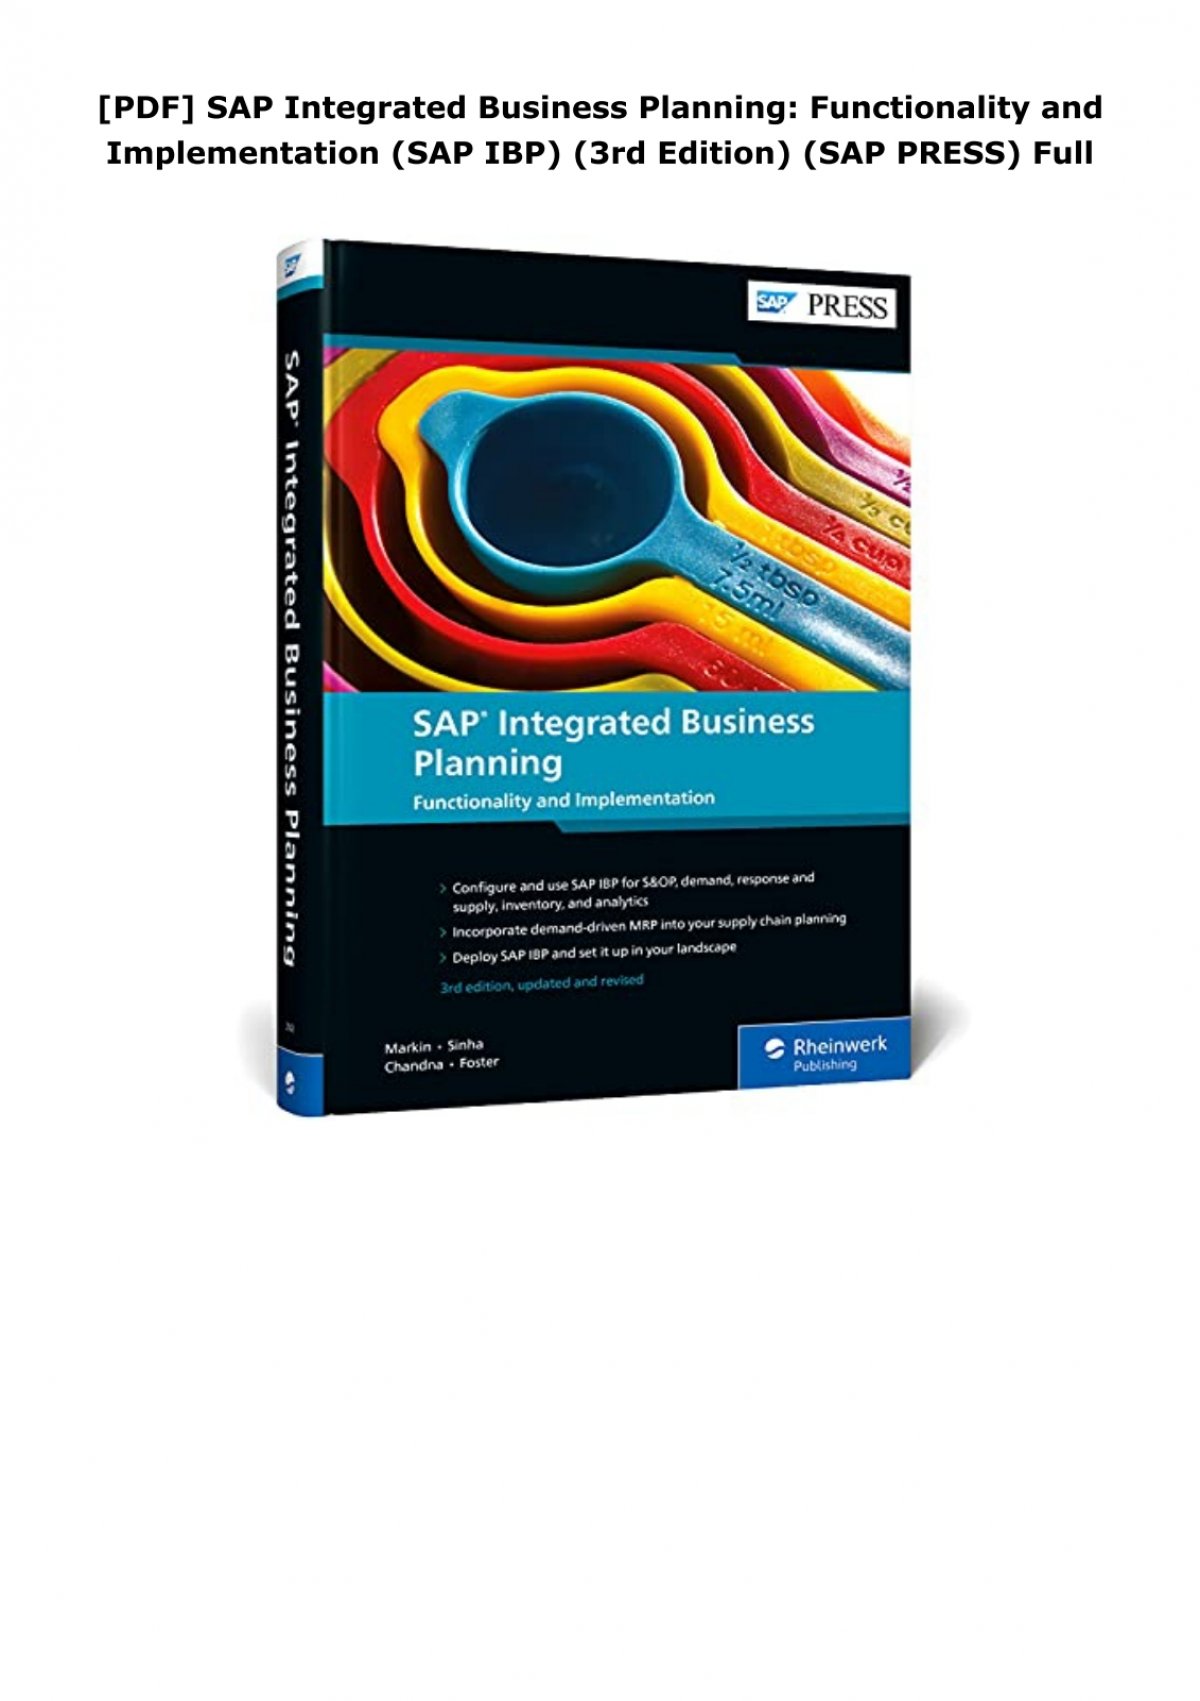 sap integrated business planning functionality and implementation pdf download